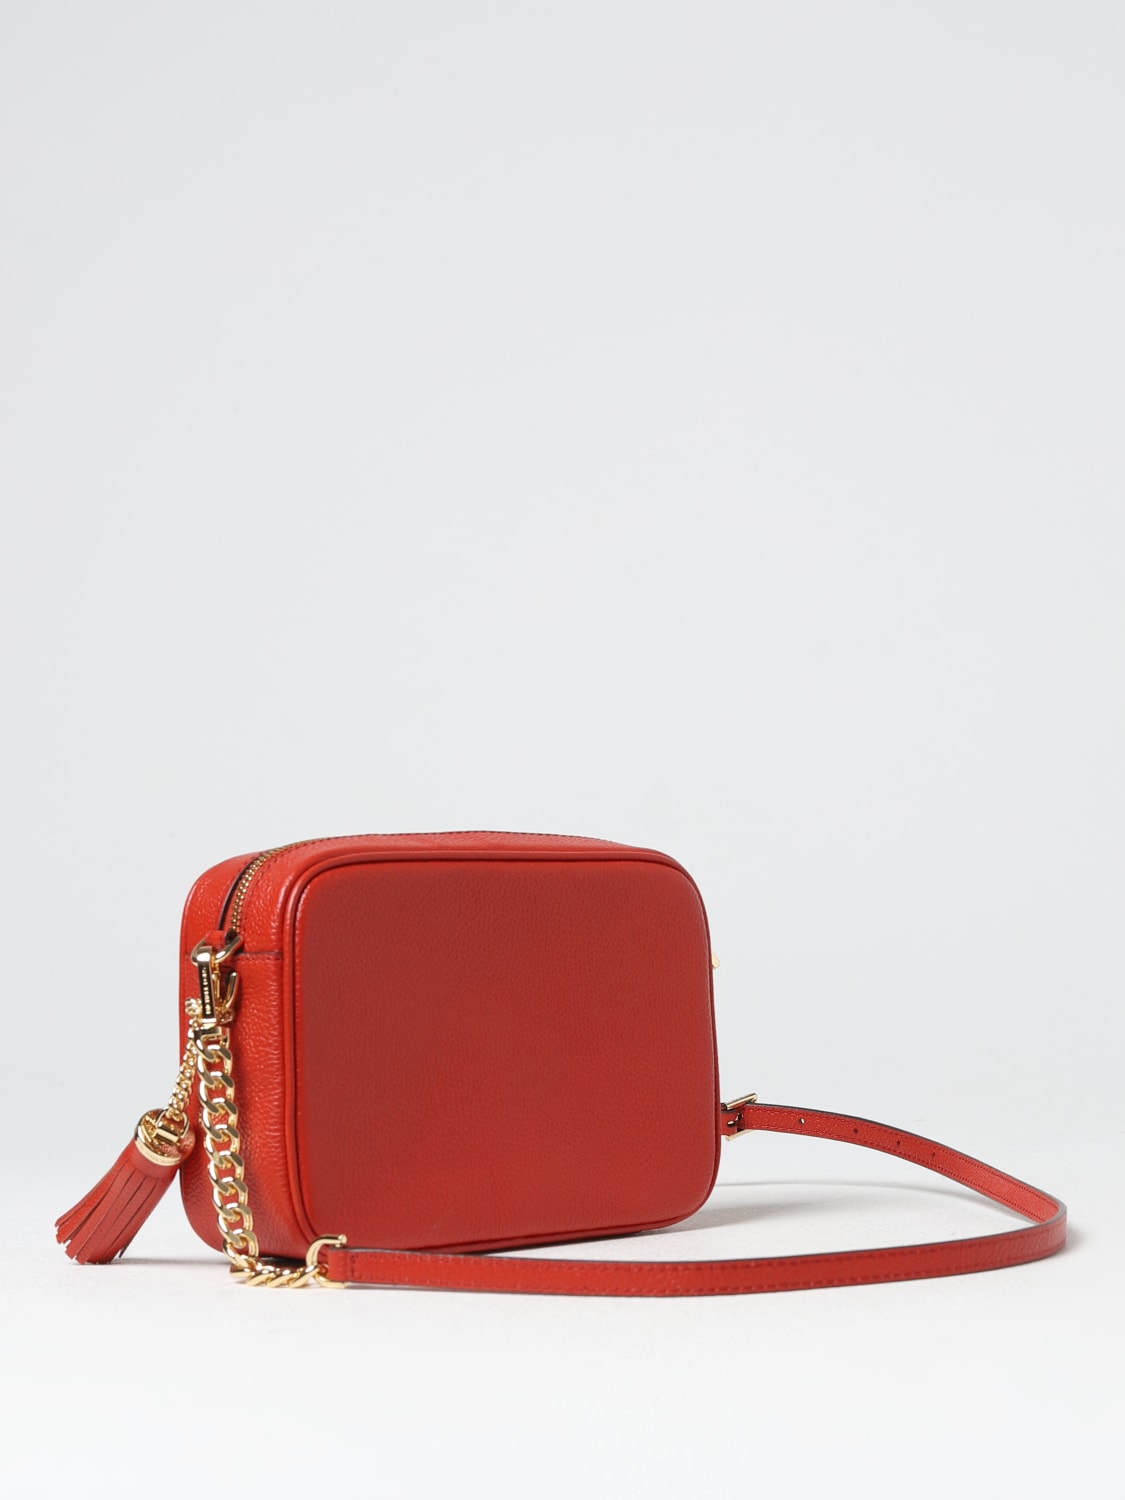 michael kors red purse with gold chain